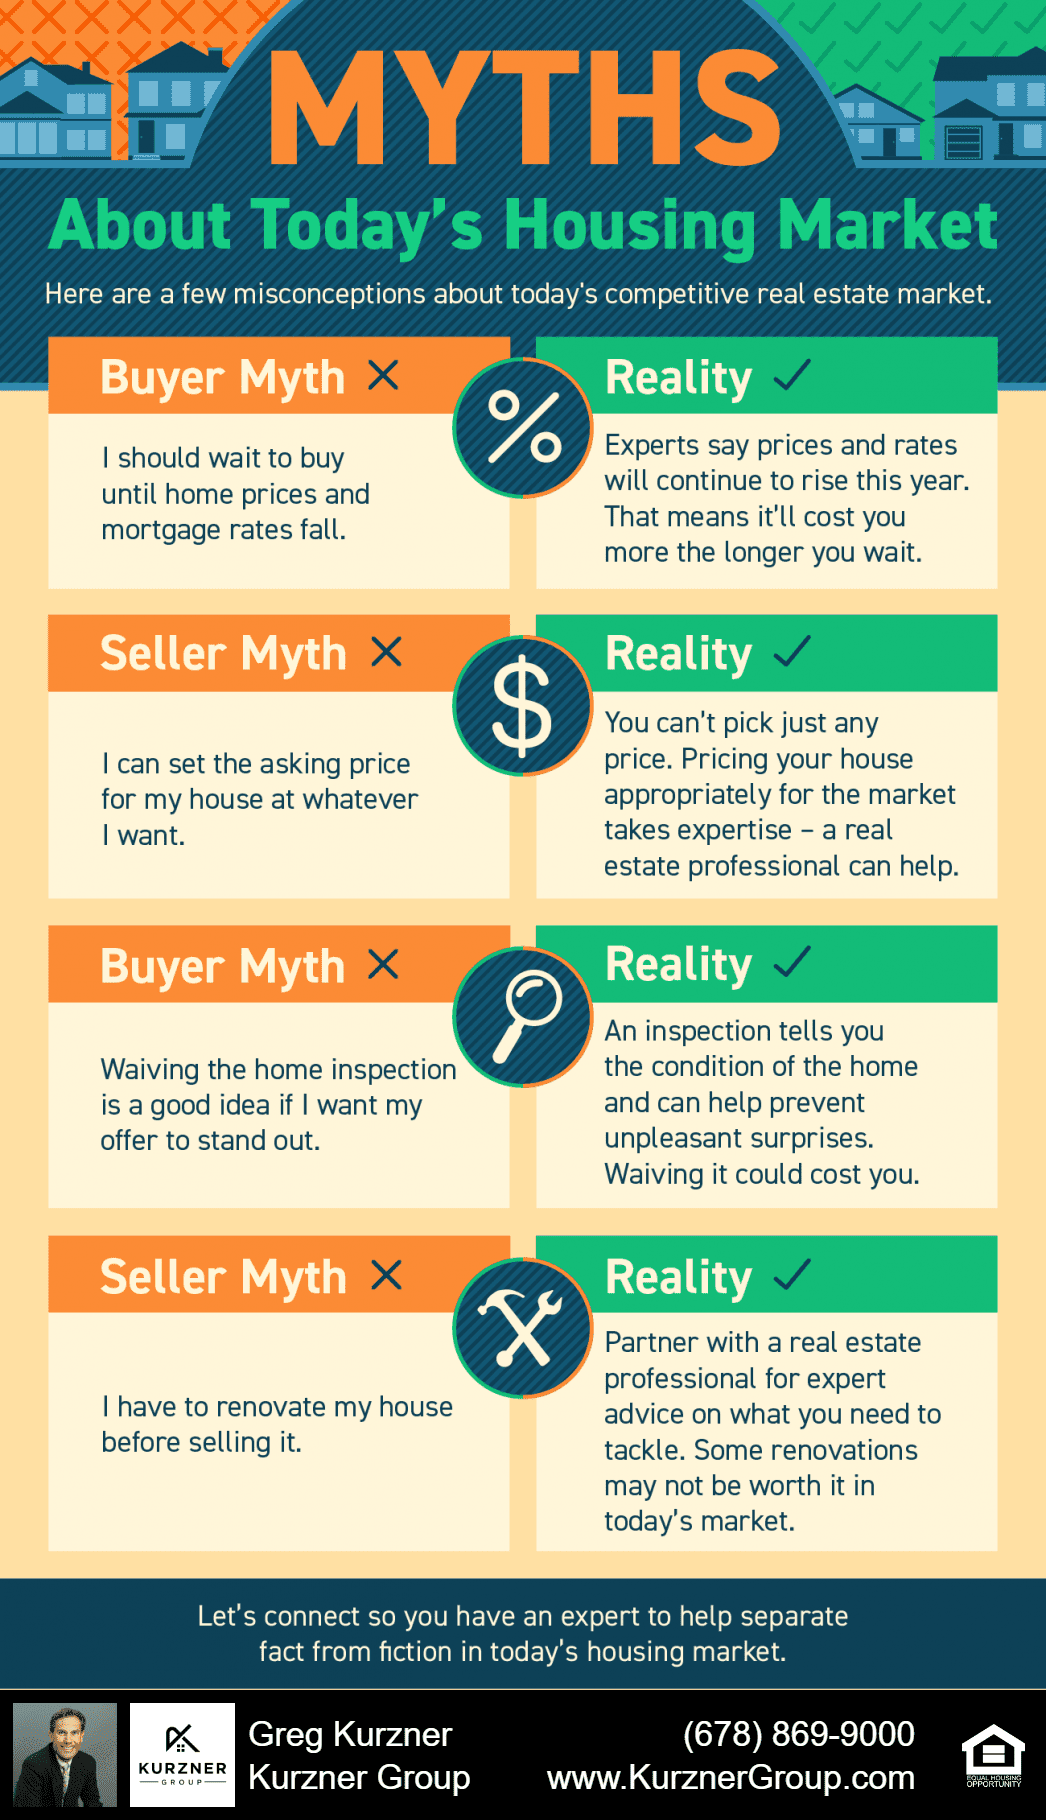 Myths About Today’s Housing Market [INFOGRAPHIC]